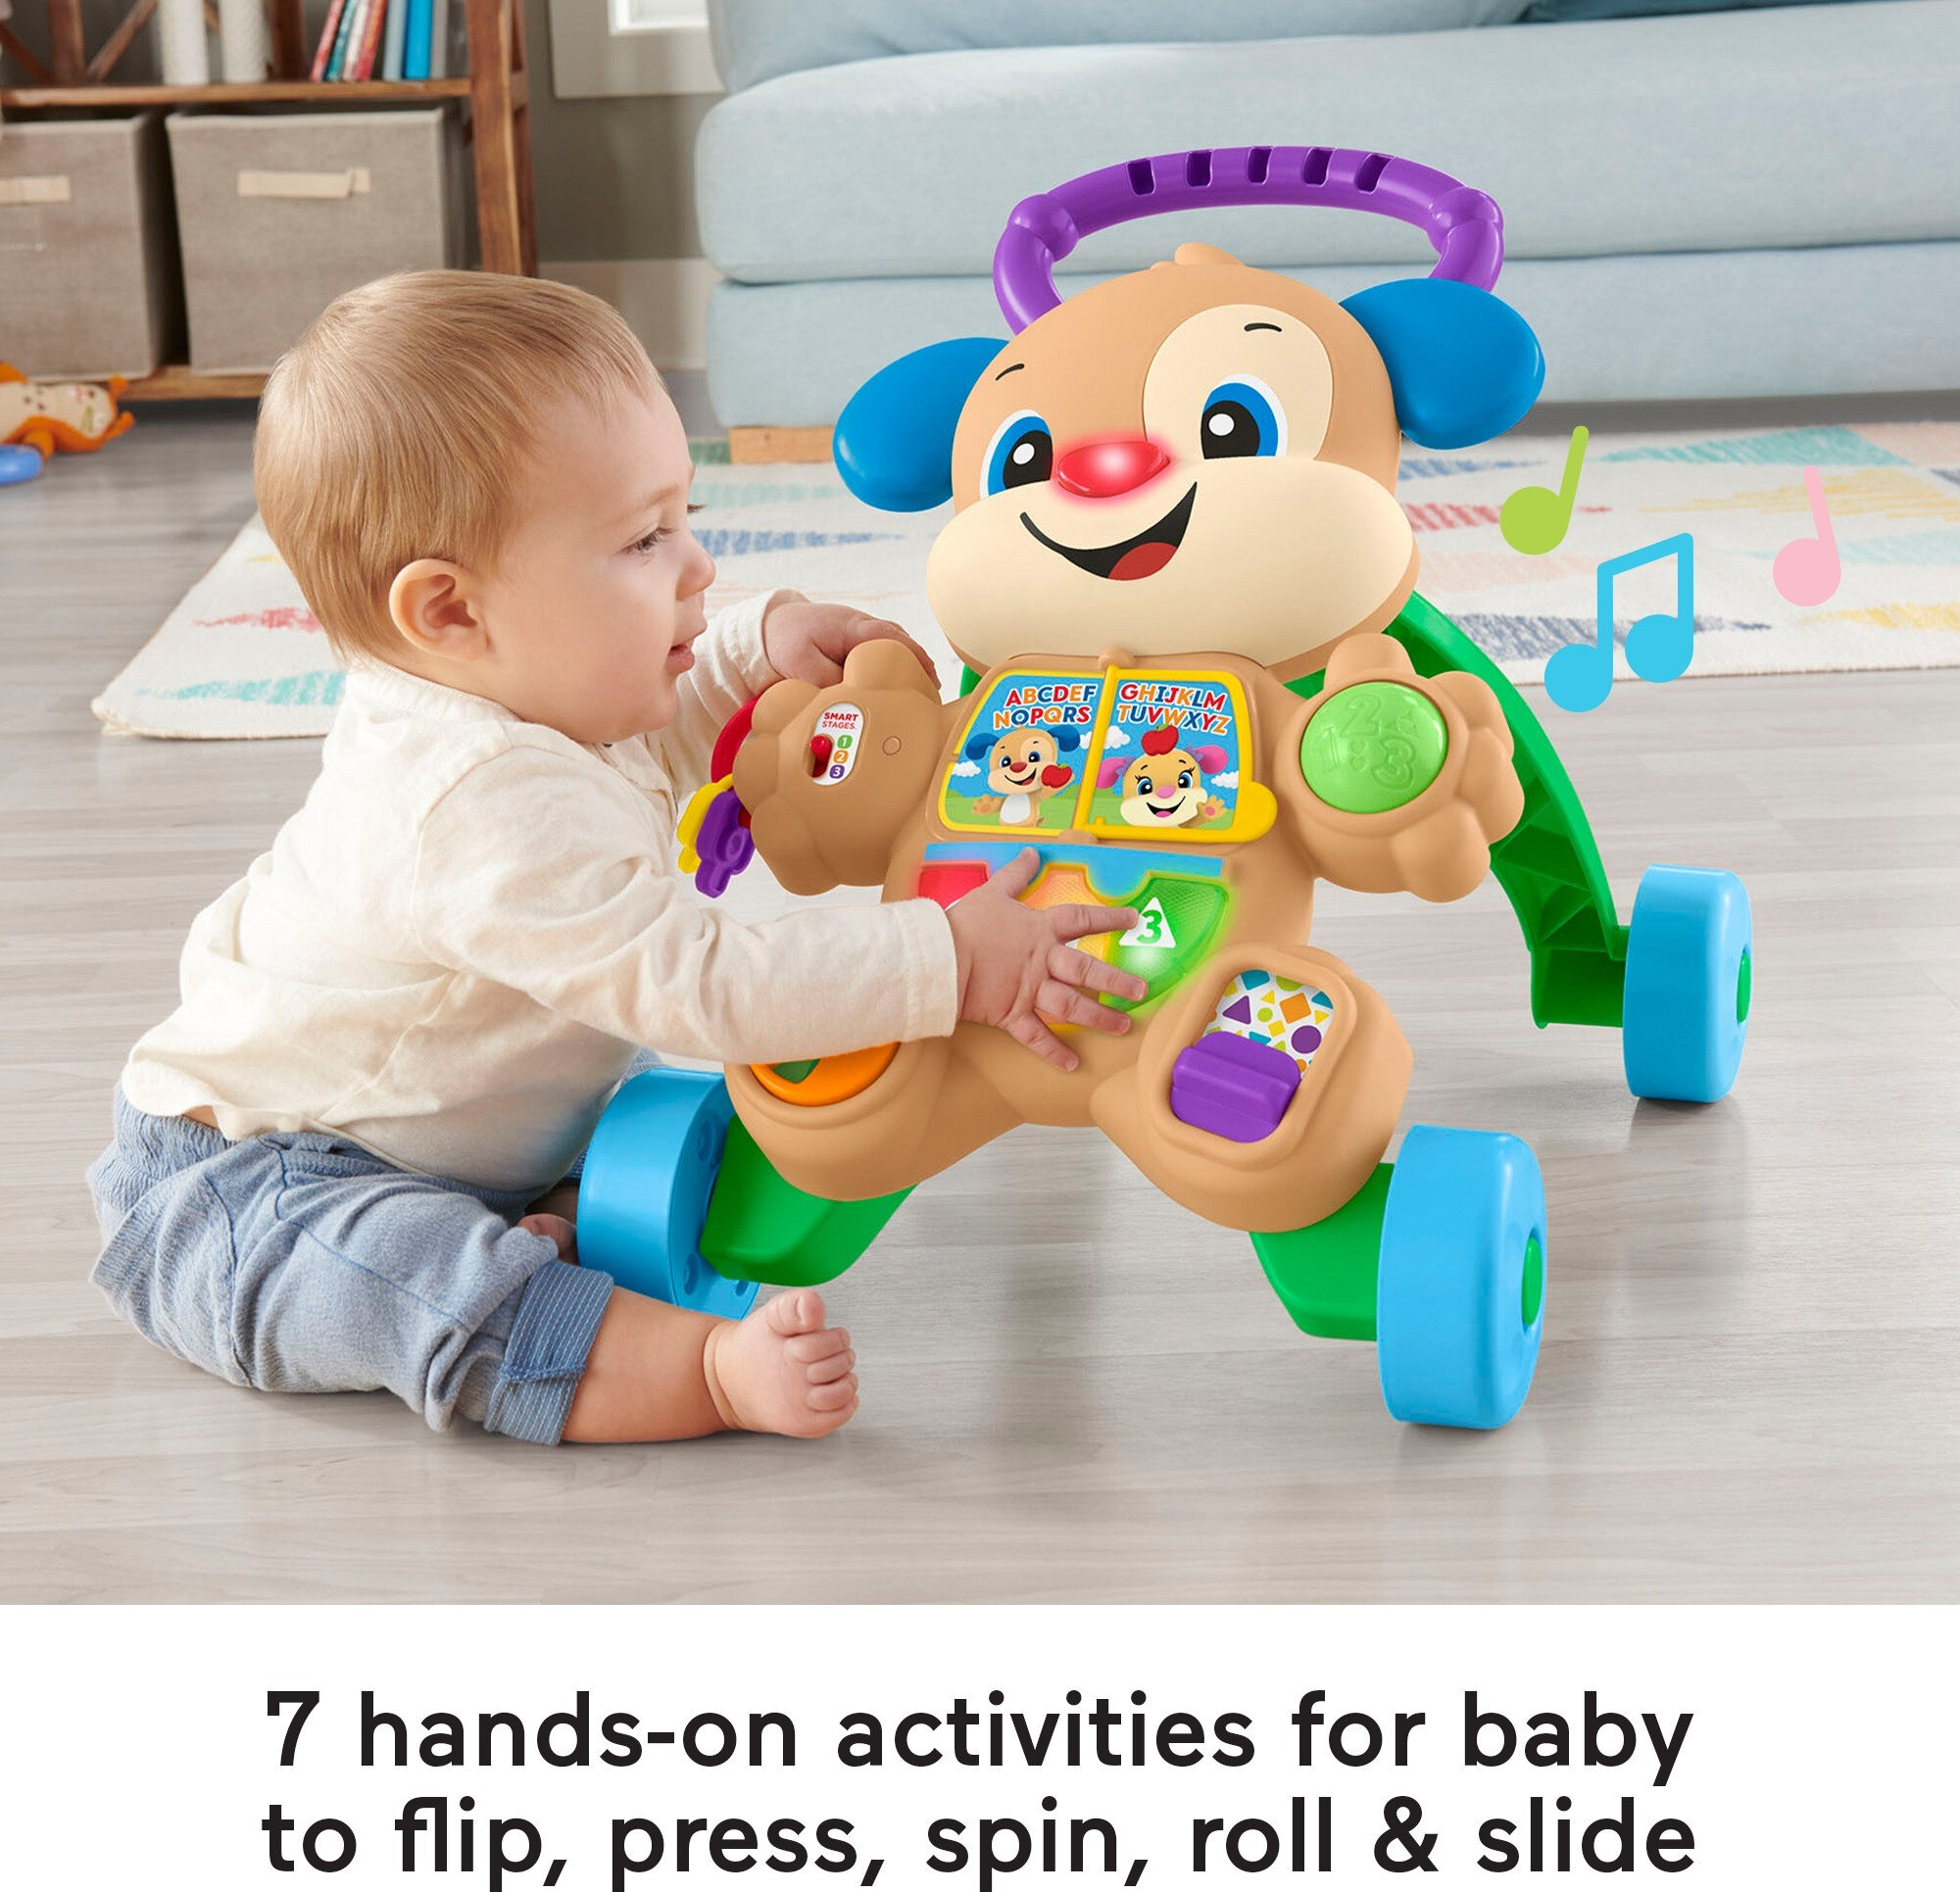 Fisher-Price Laugh & Learn Smart Stages Learn with Puppy Walker Baby & Toddler Toy - image 5 of 7